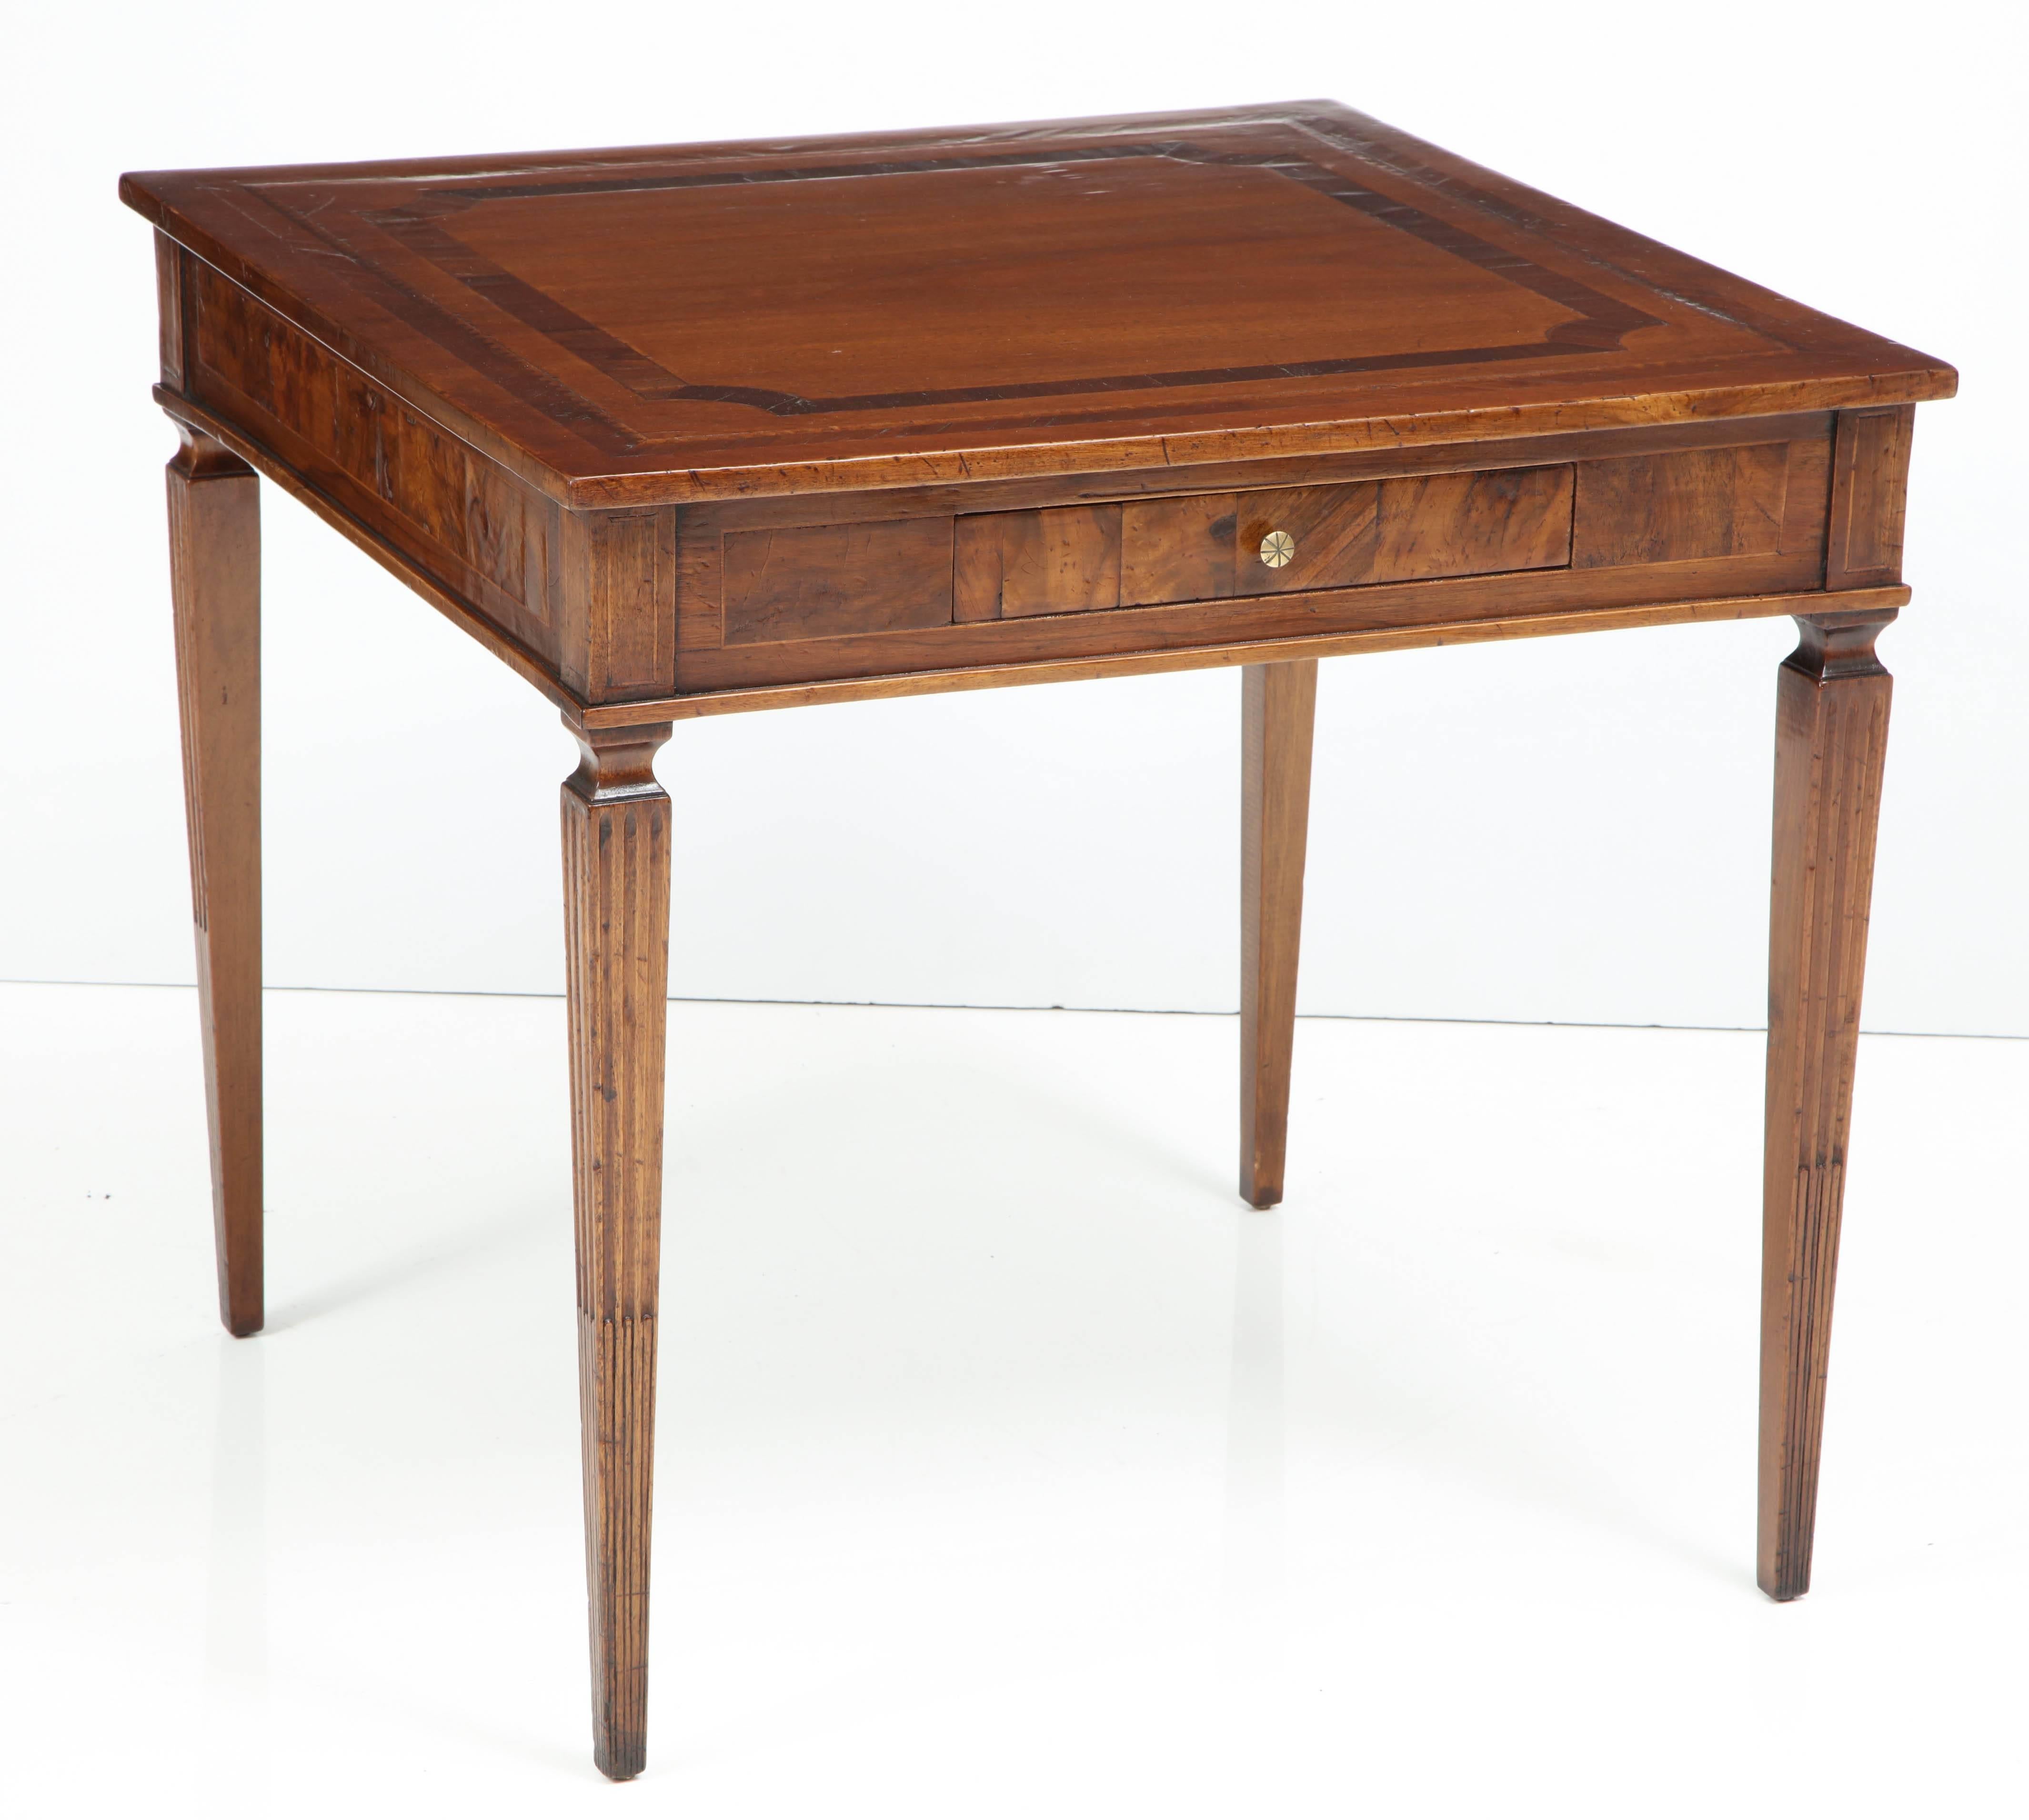 A walnut card table with elegant, Classic detail, including a beautifully crafted inlaid design on the top, a burl wood apron, and gracious tapered and fluted legs. The piece has one small drawer with a simple brass pull. It is finished on all sides